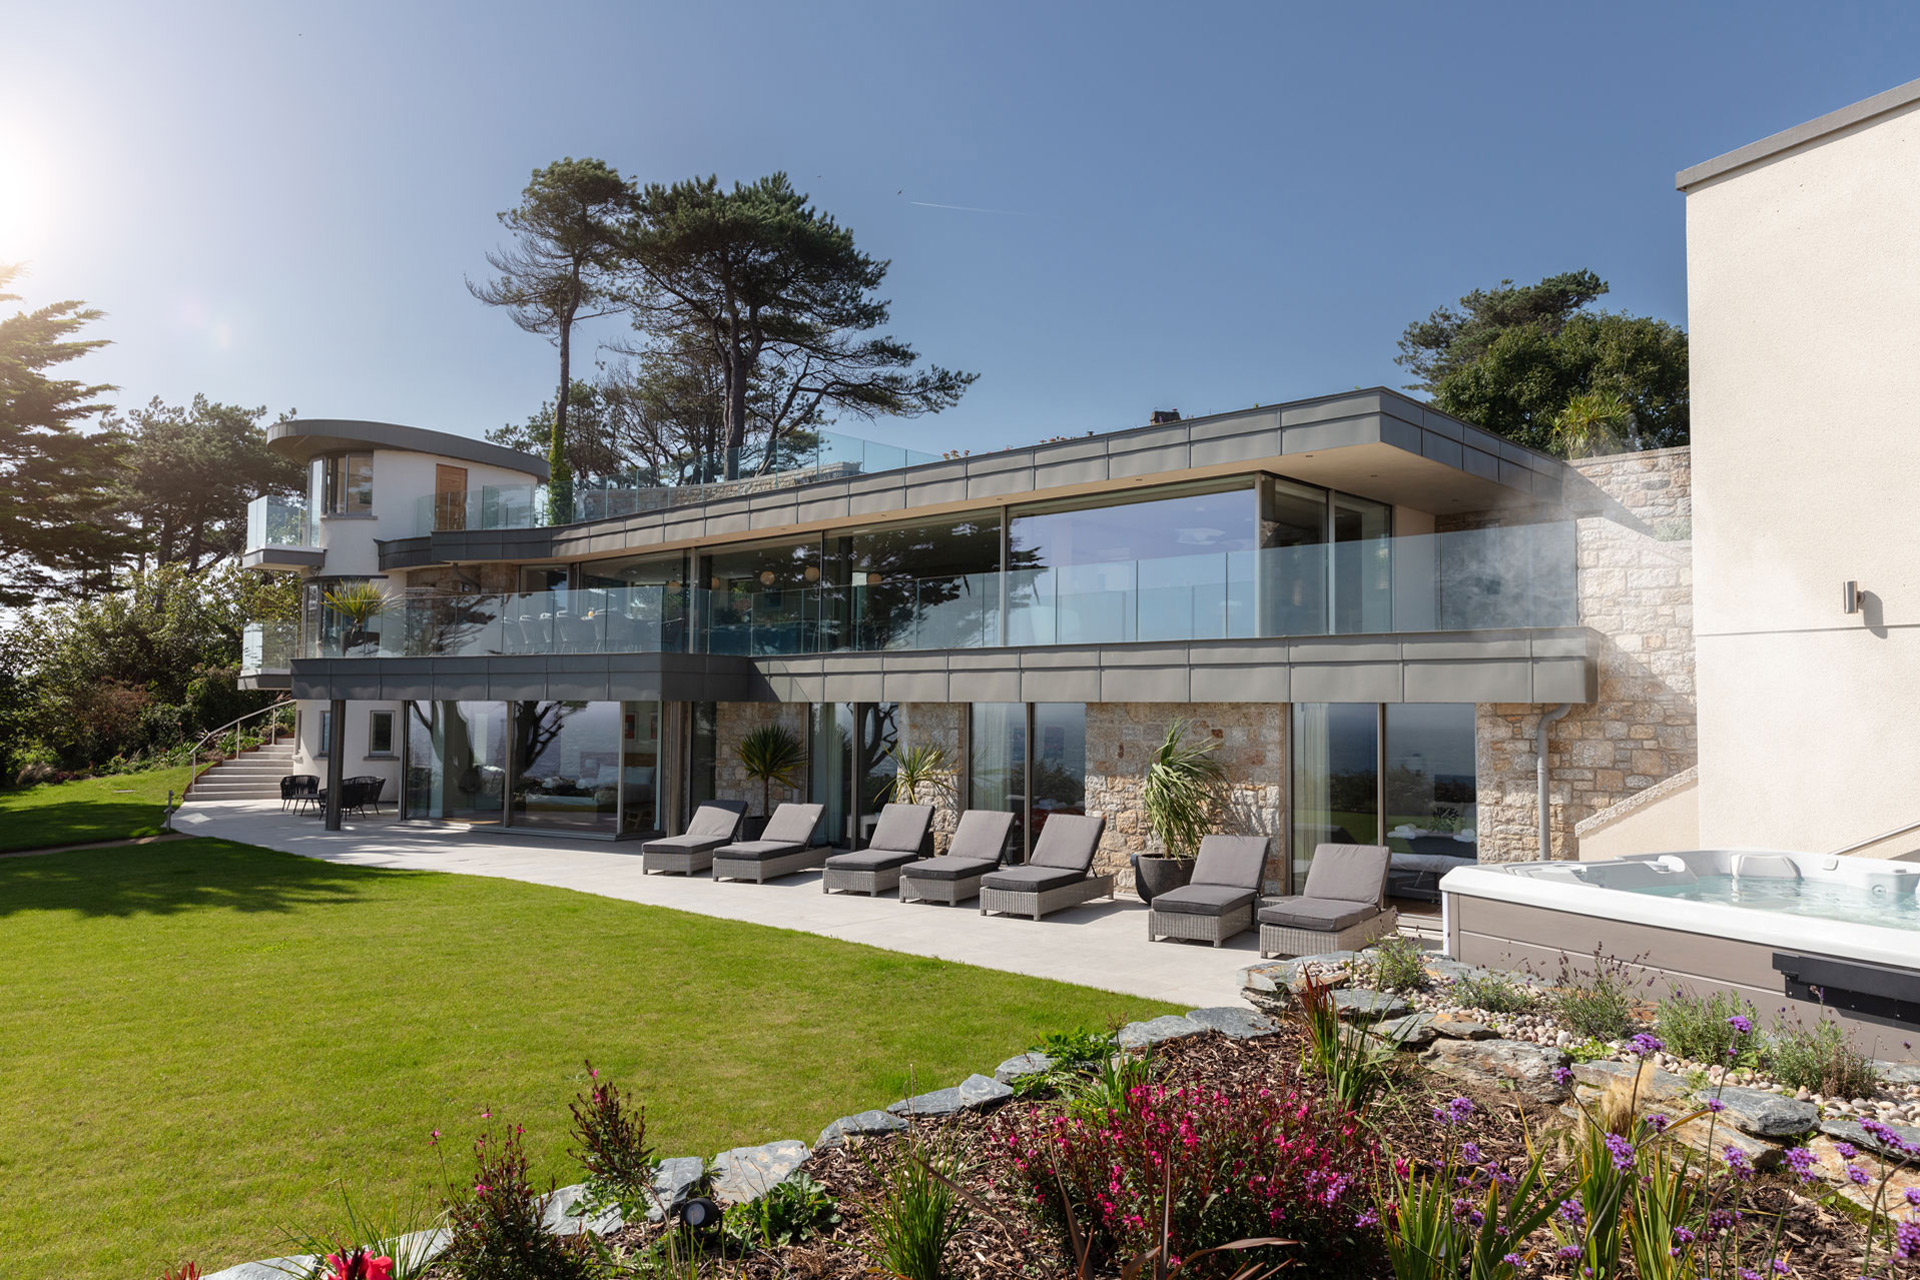 Modern coastal home with floor-to-ceiling windows and glass balconies.